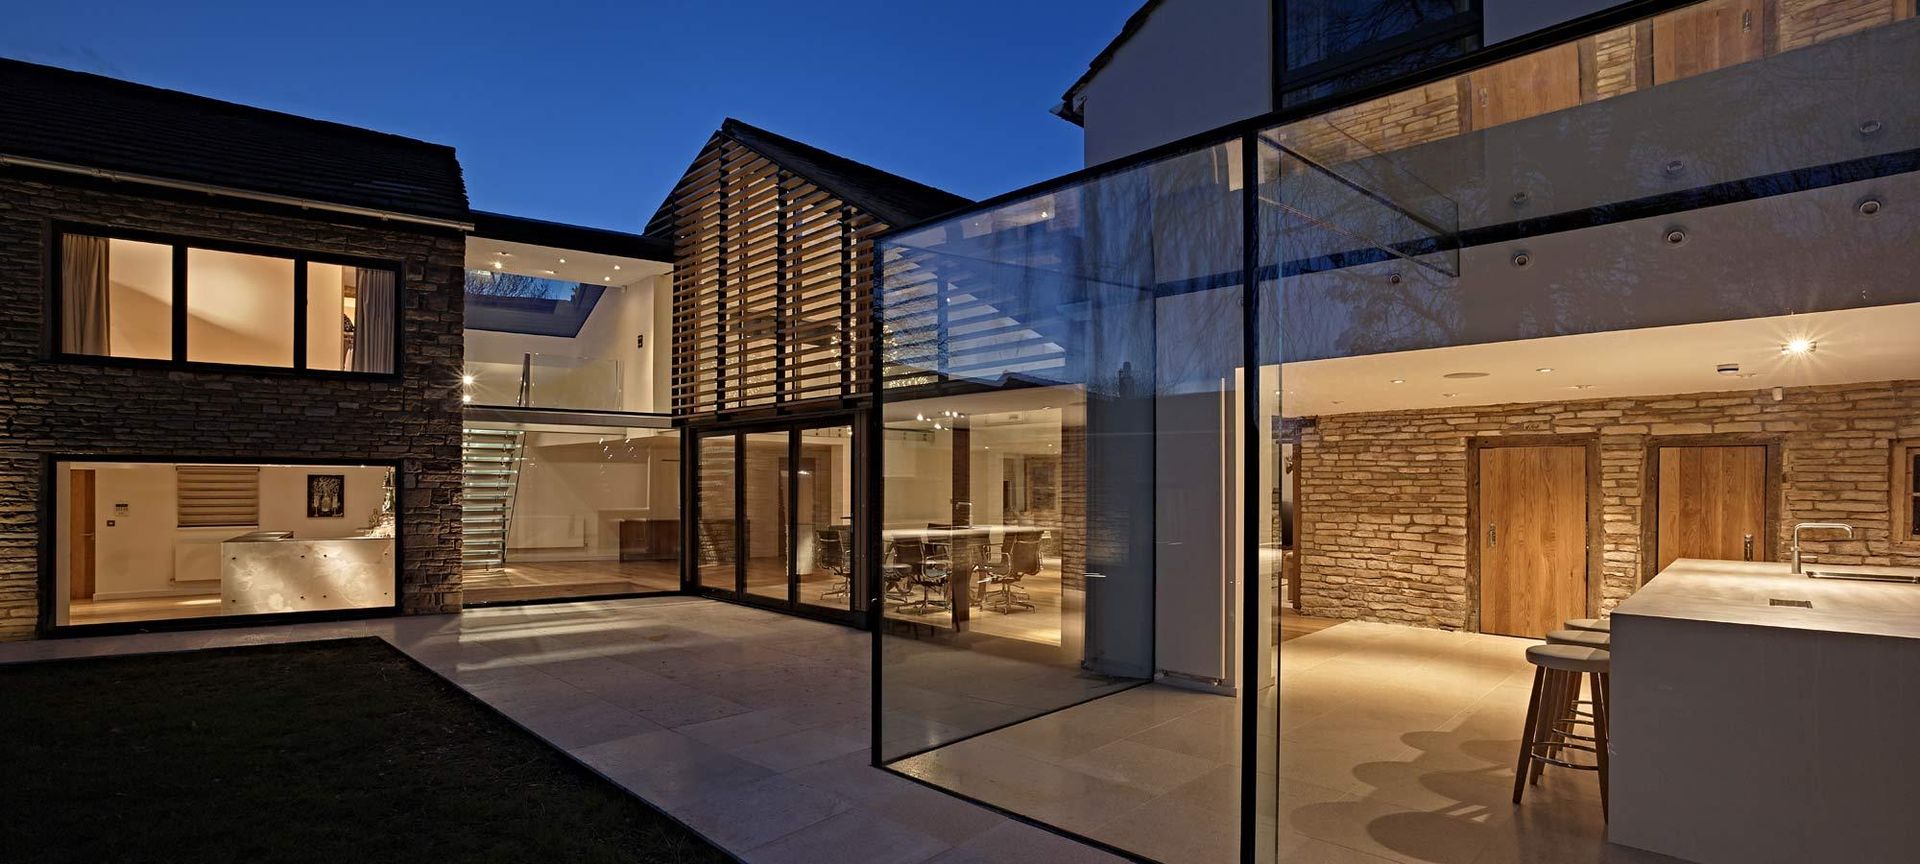 House 141, Andrew Wallace Architects Andrew Wallace Architects 房子